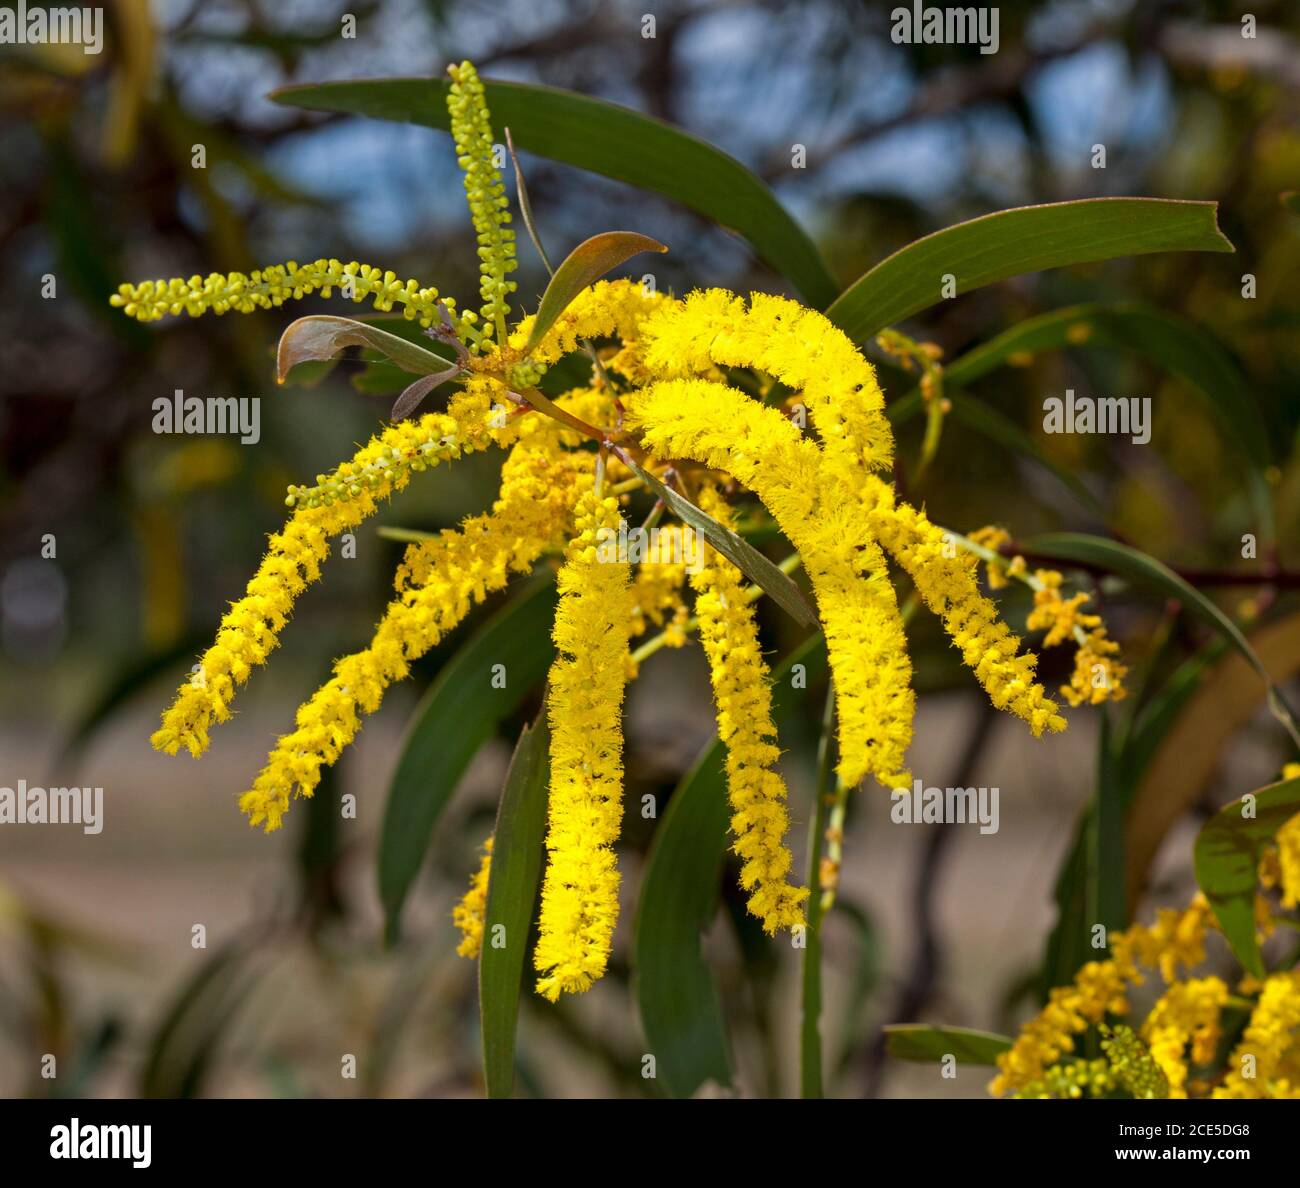 Cluster of long vivid yellow flowers and green leaves of wattle tree, Acacia crassa subspecies longicoma, in outback Australia Stock Photo